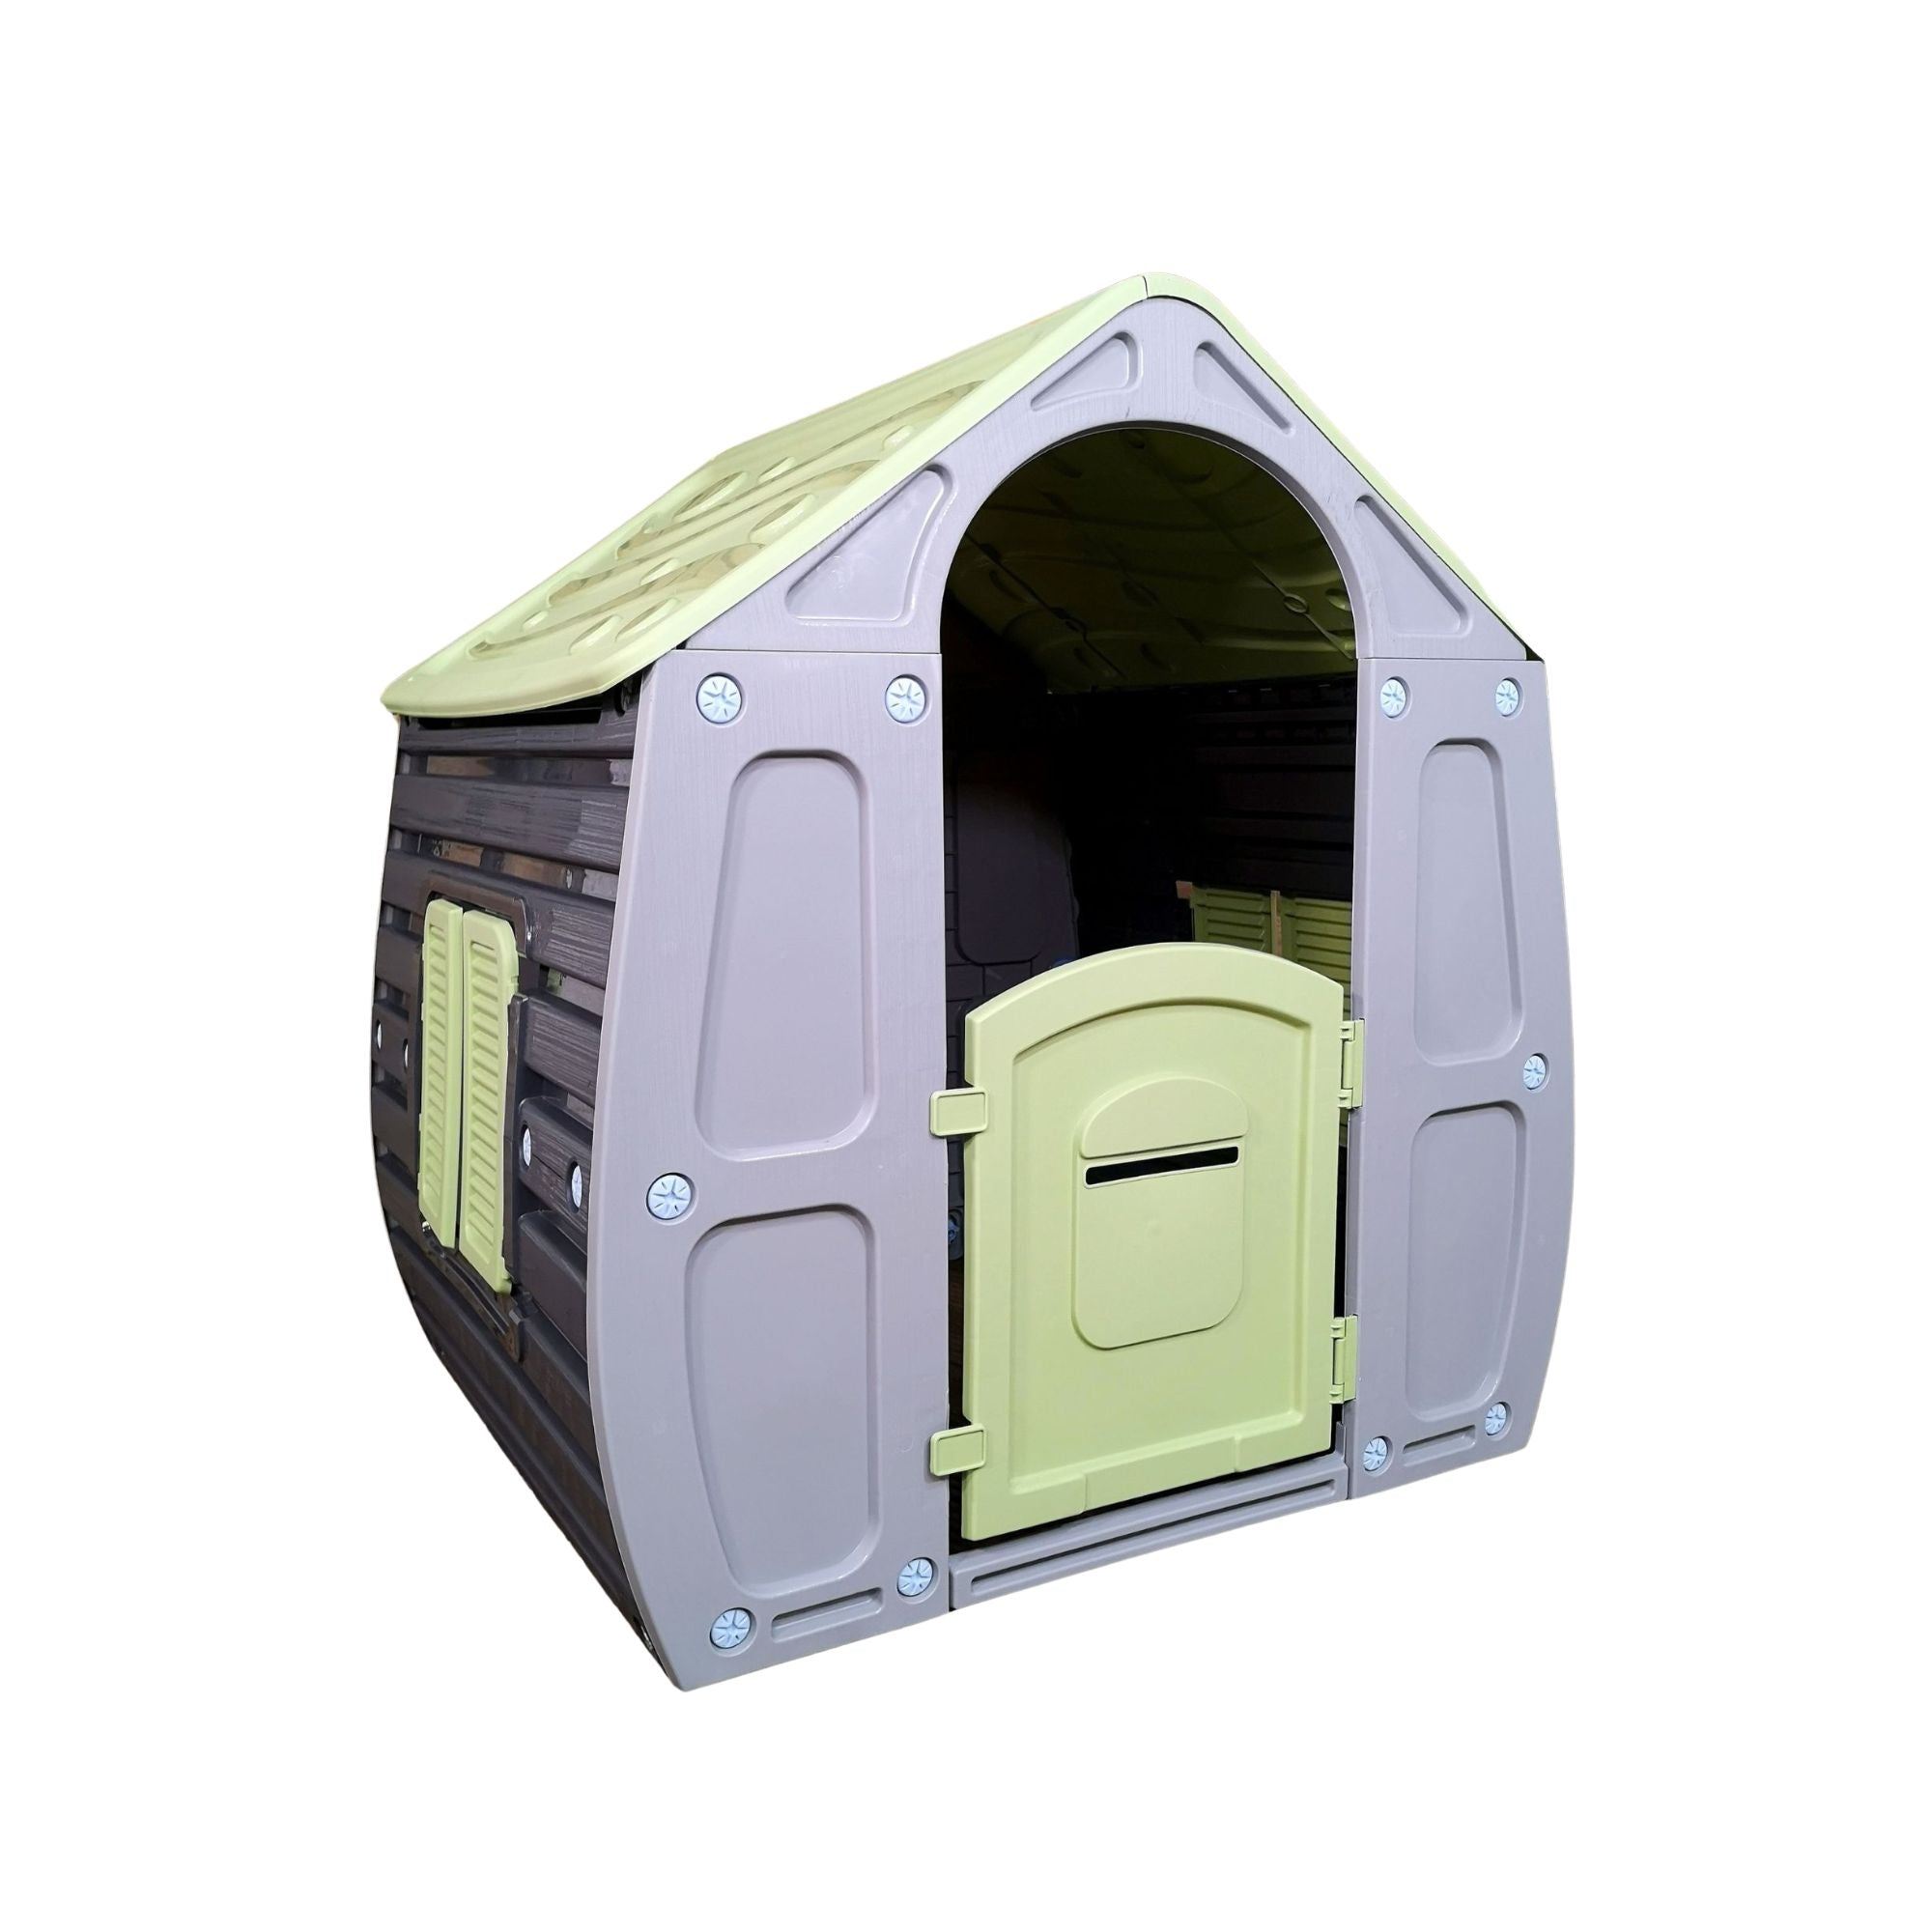 1.09m Classic Colour Kids Indoor Outdoor Plastic Wendy house Magical Playhouse